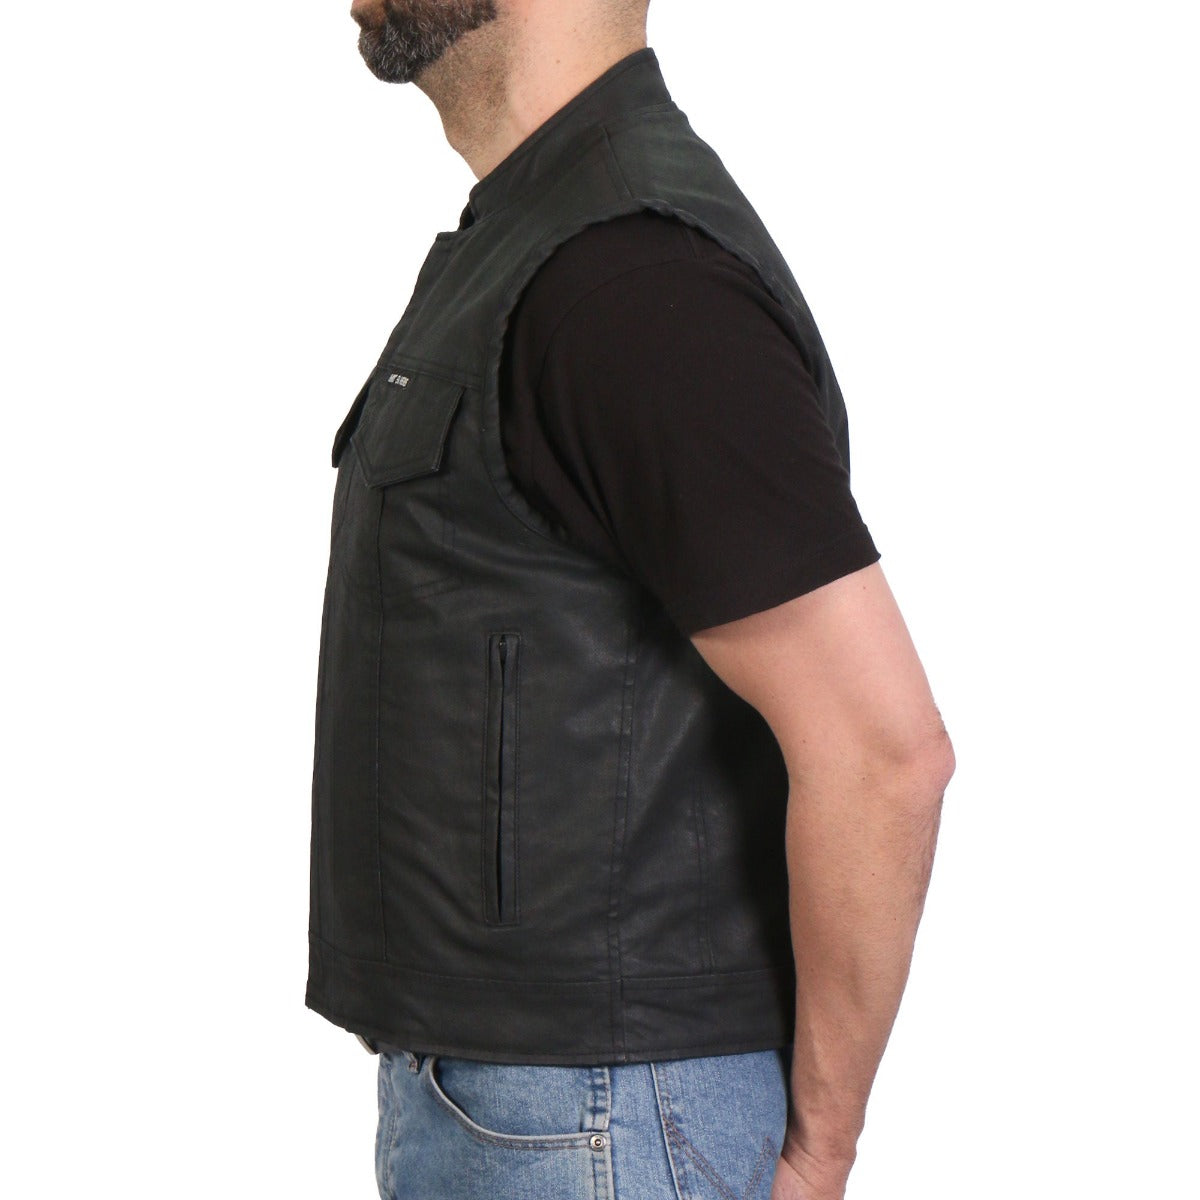 Hot Leathers Men's Waxed Cotton Club Style Vest